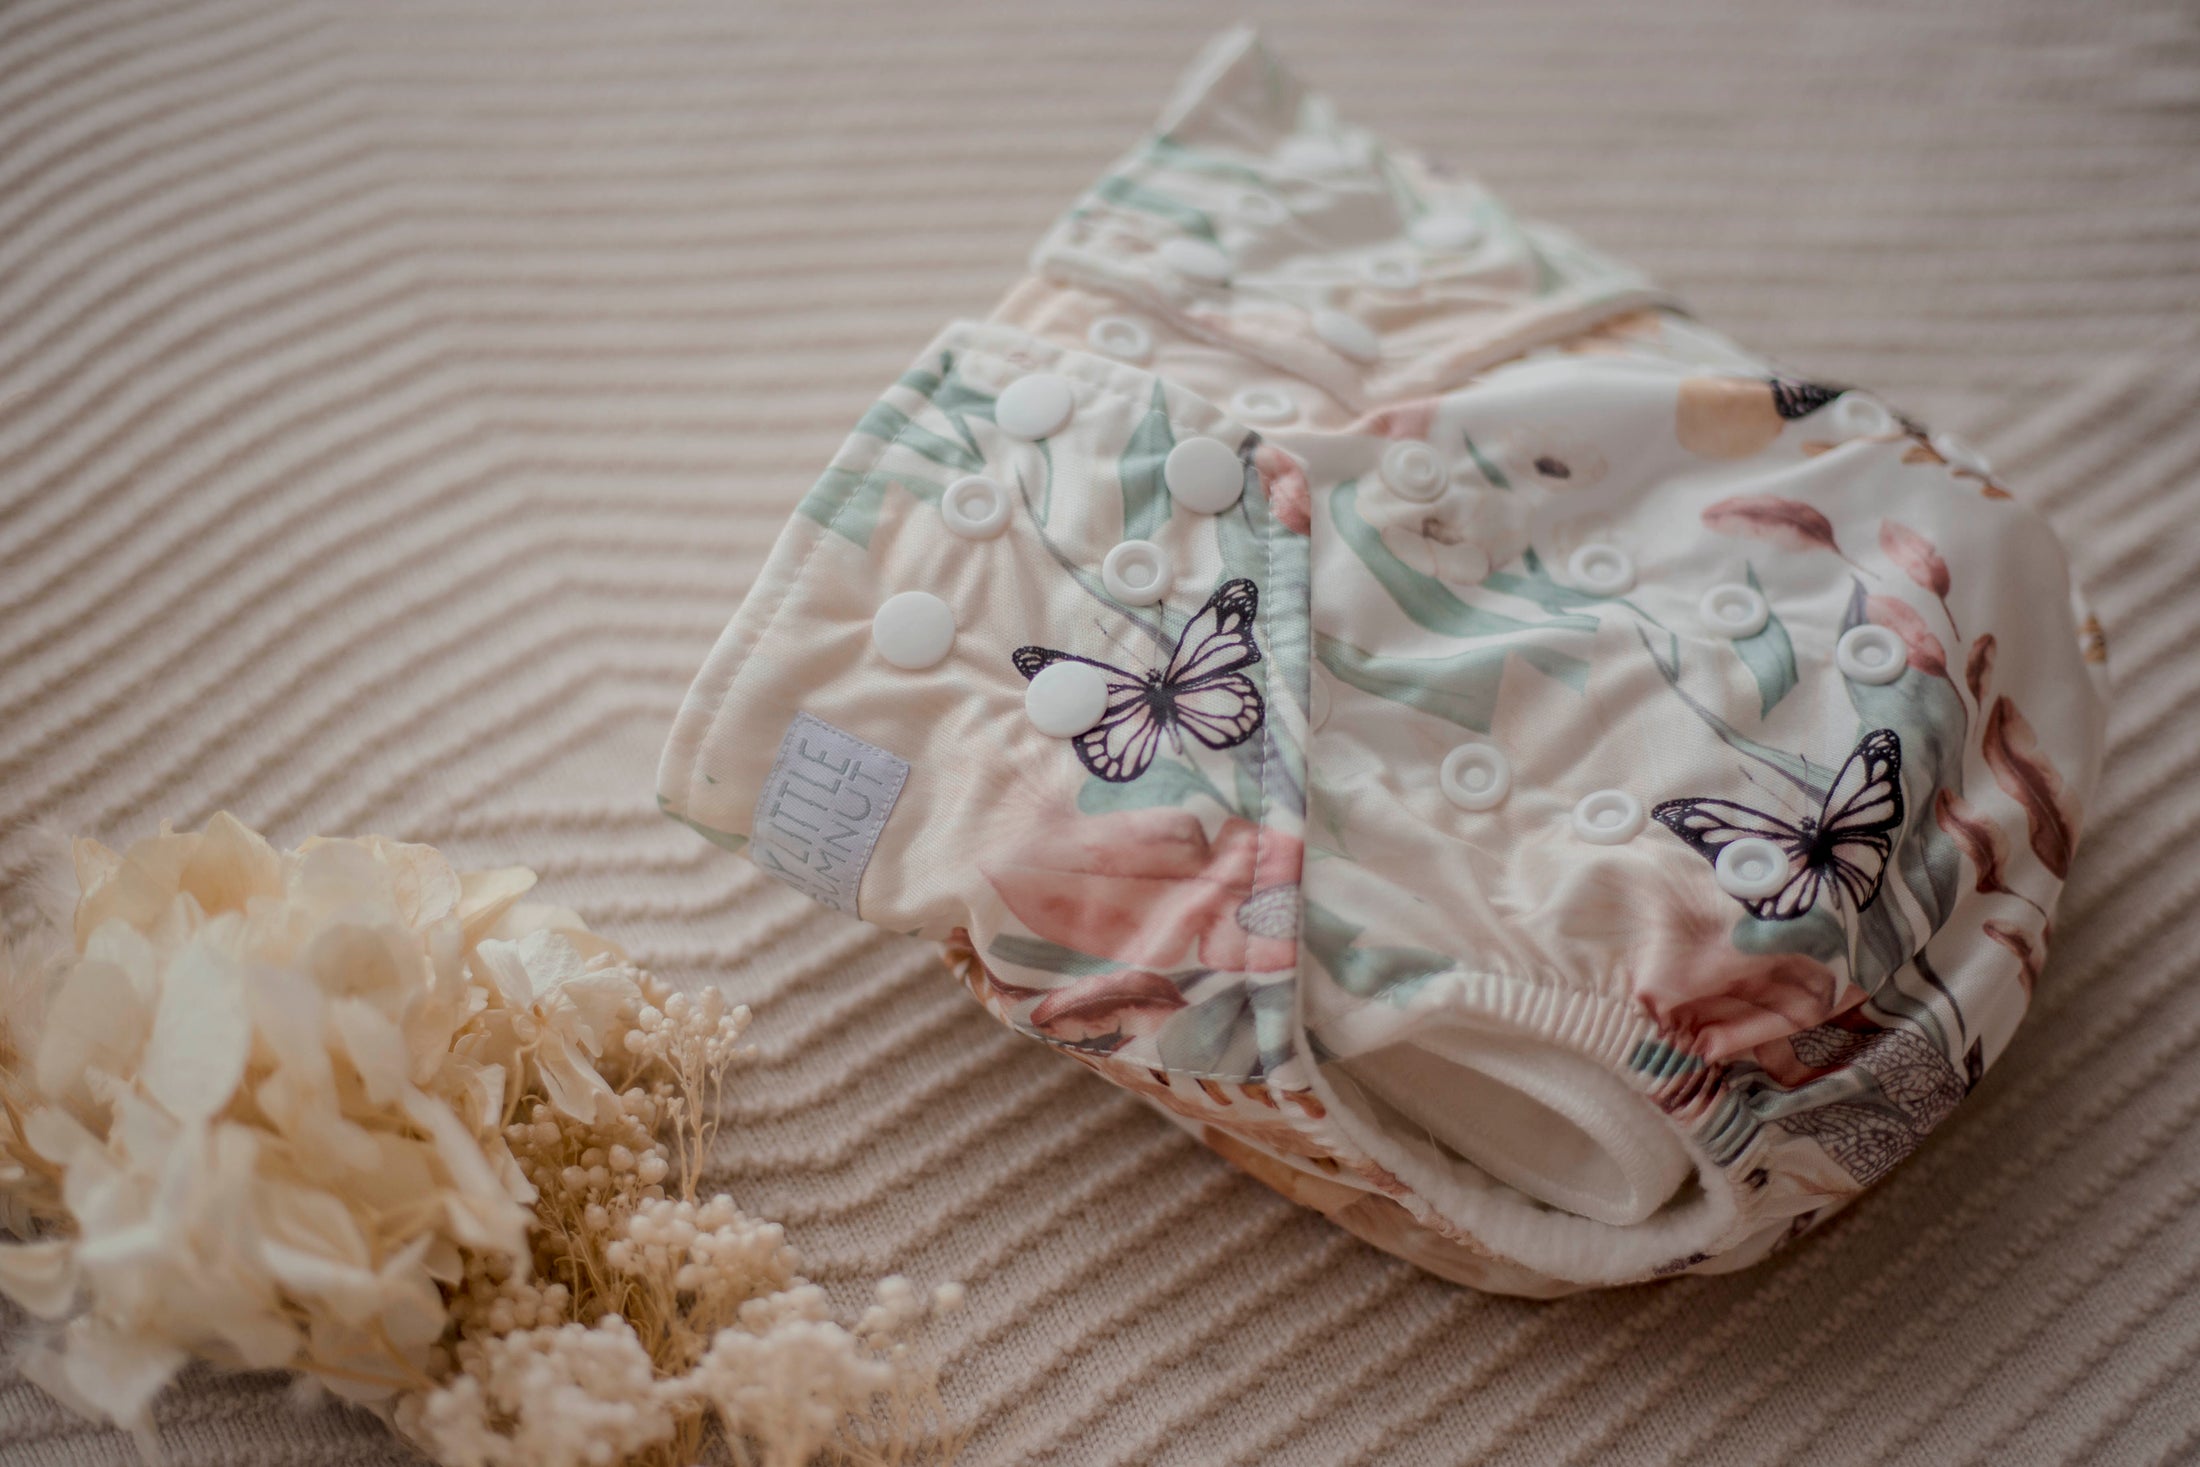 Modern cloth nappies by my little gumnut. australian owned reusable nappies. bamboo cloth nappies.